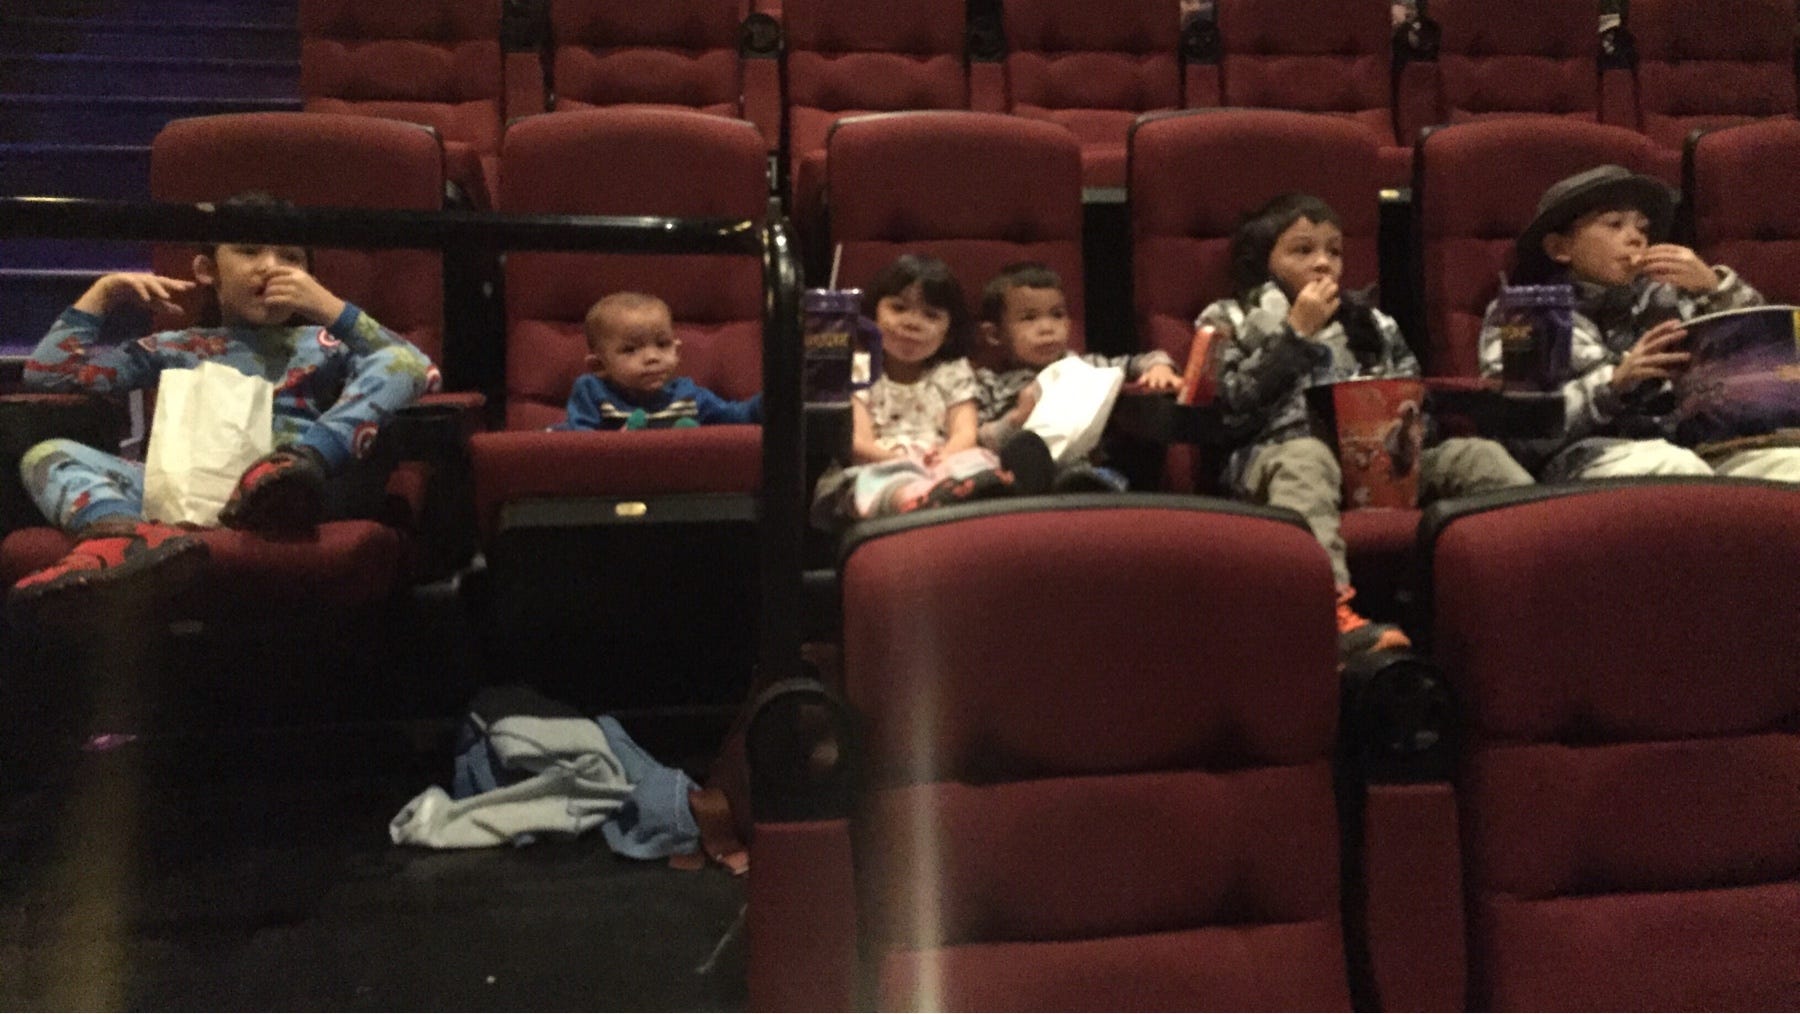 How To Watch Star Wars The Force Awakens With Little Kids